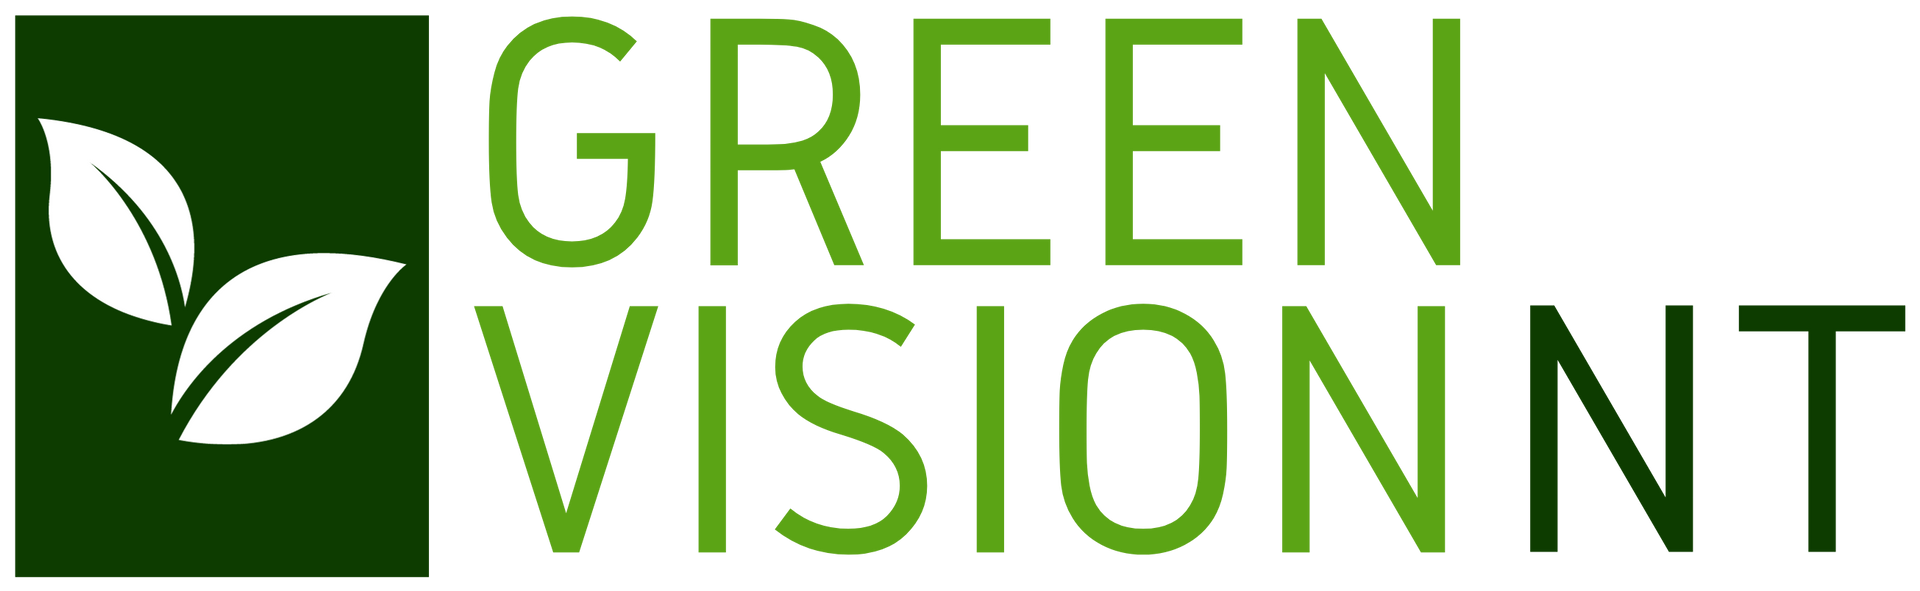 Green Vision NT: Your Premier Landscaping Company in Darwin